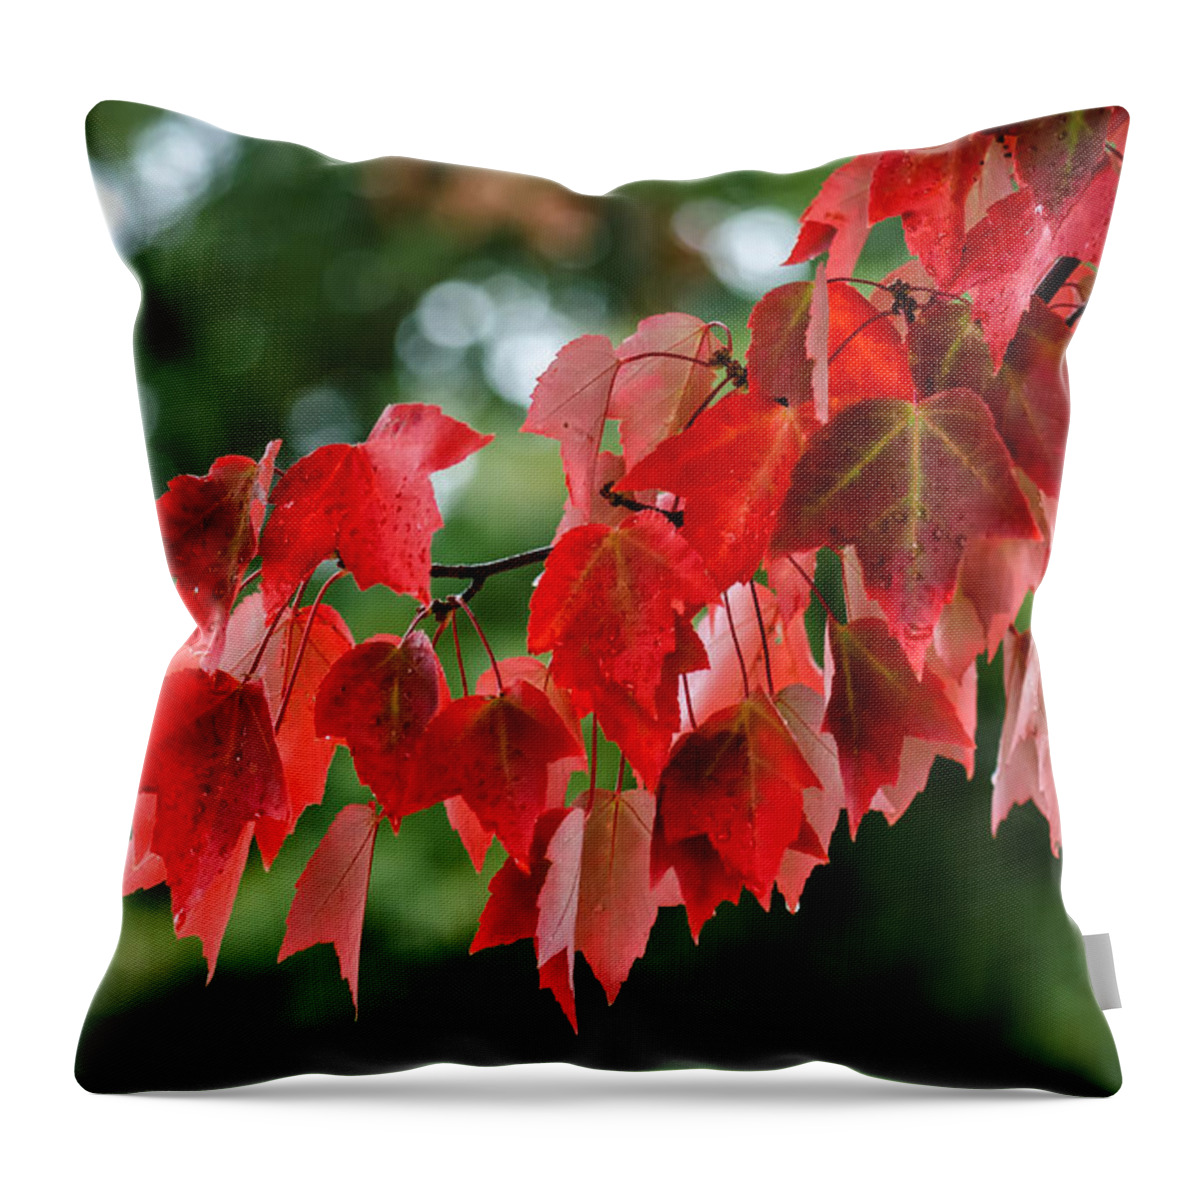 Maple Throw Pillow featuring the photograph Maple Red by James Barber